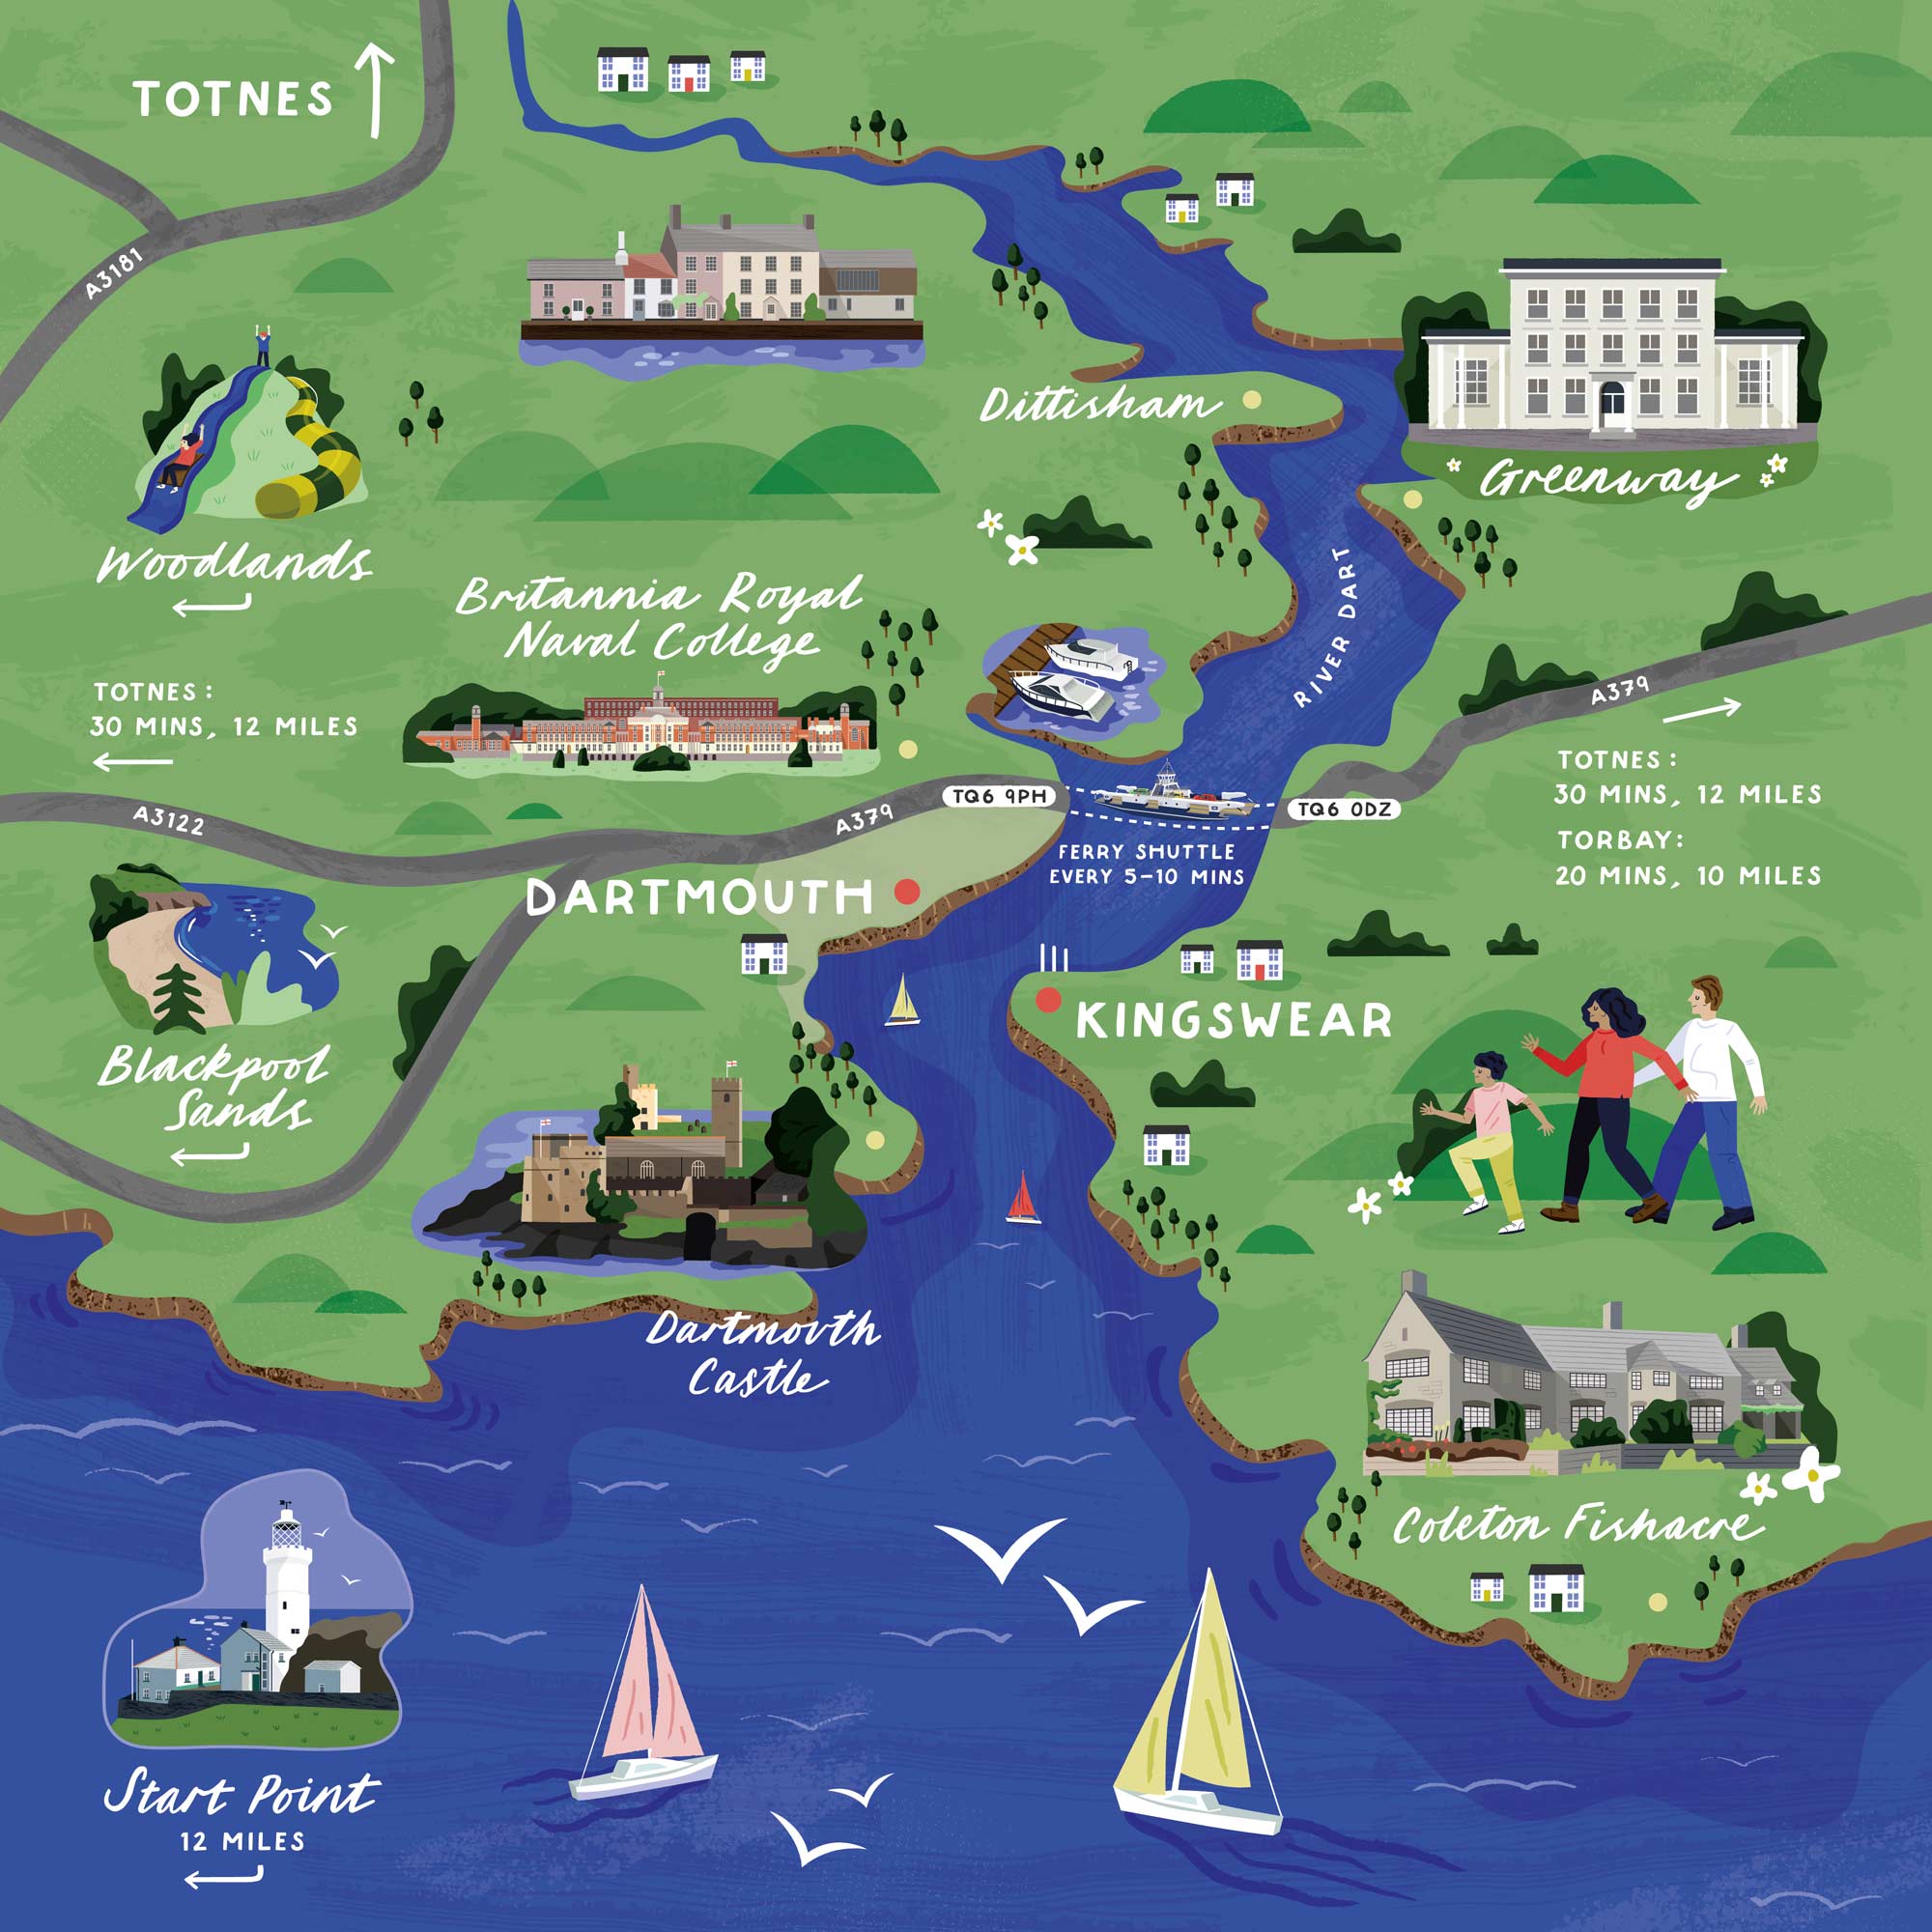 A map of Dartmouth showing the ferry crossing, for Dartmouth Higher Ferry by Elly Jahnz